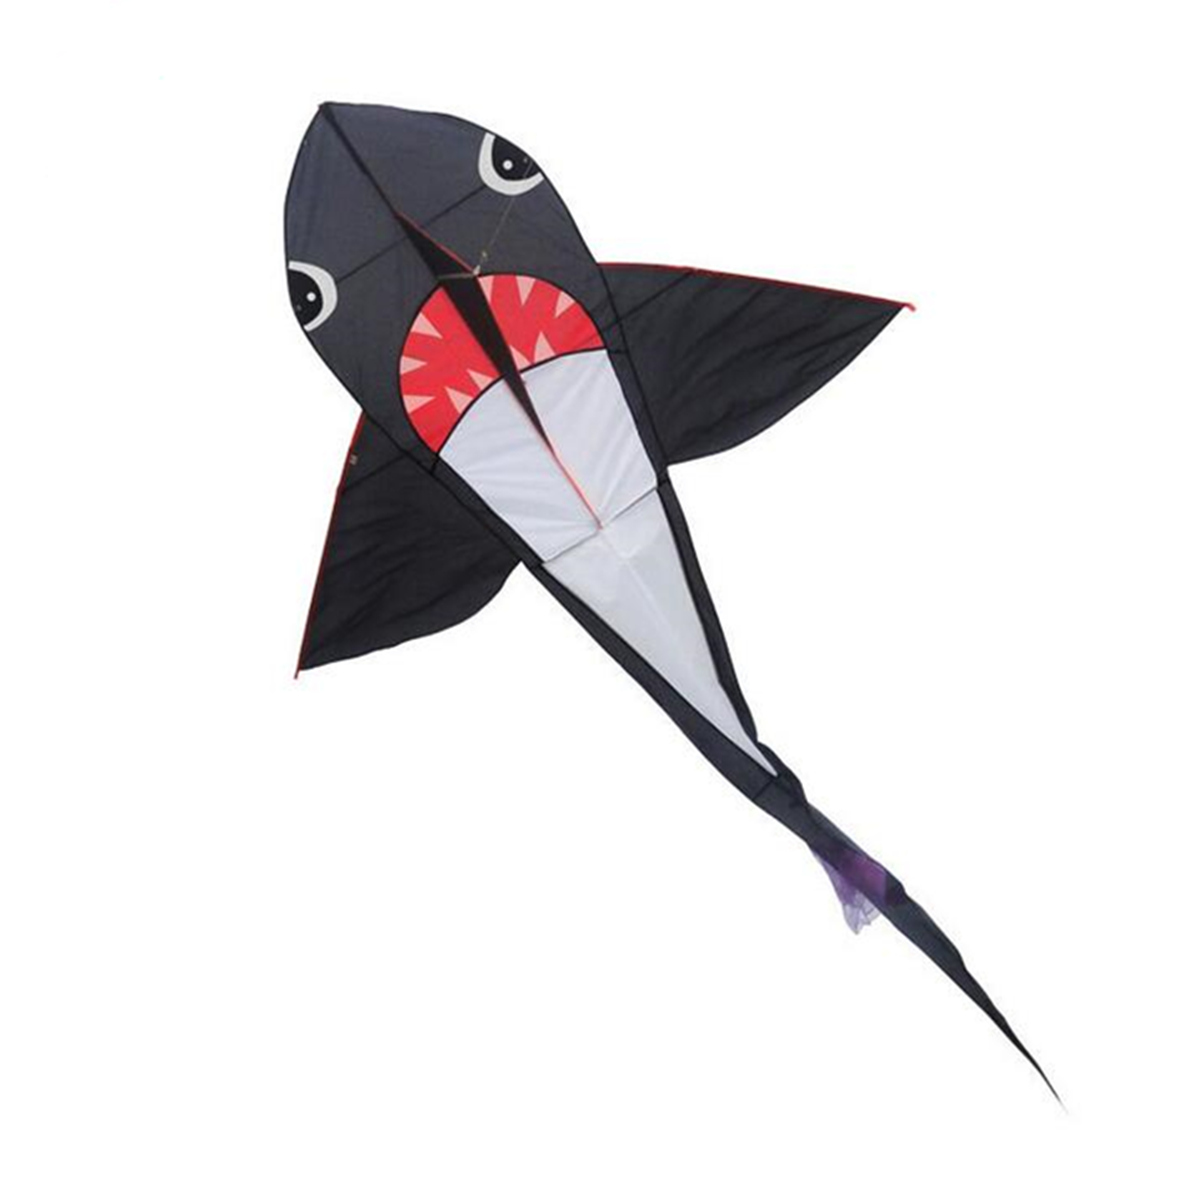 5577-Inches-Big-Size-Shark-Kite-Kid-Outdoor-Play-Toys-Without-Line-Winder-1436719-2